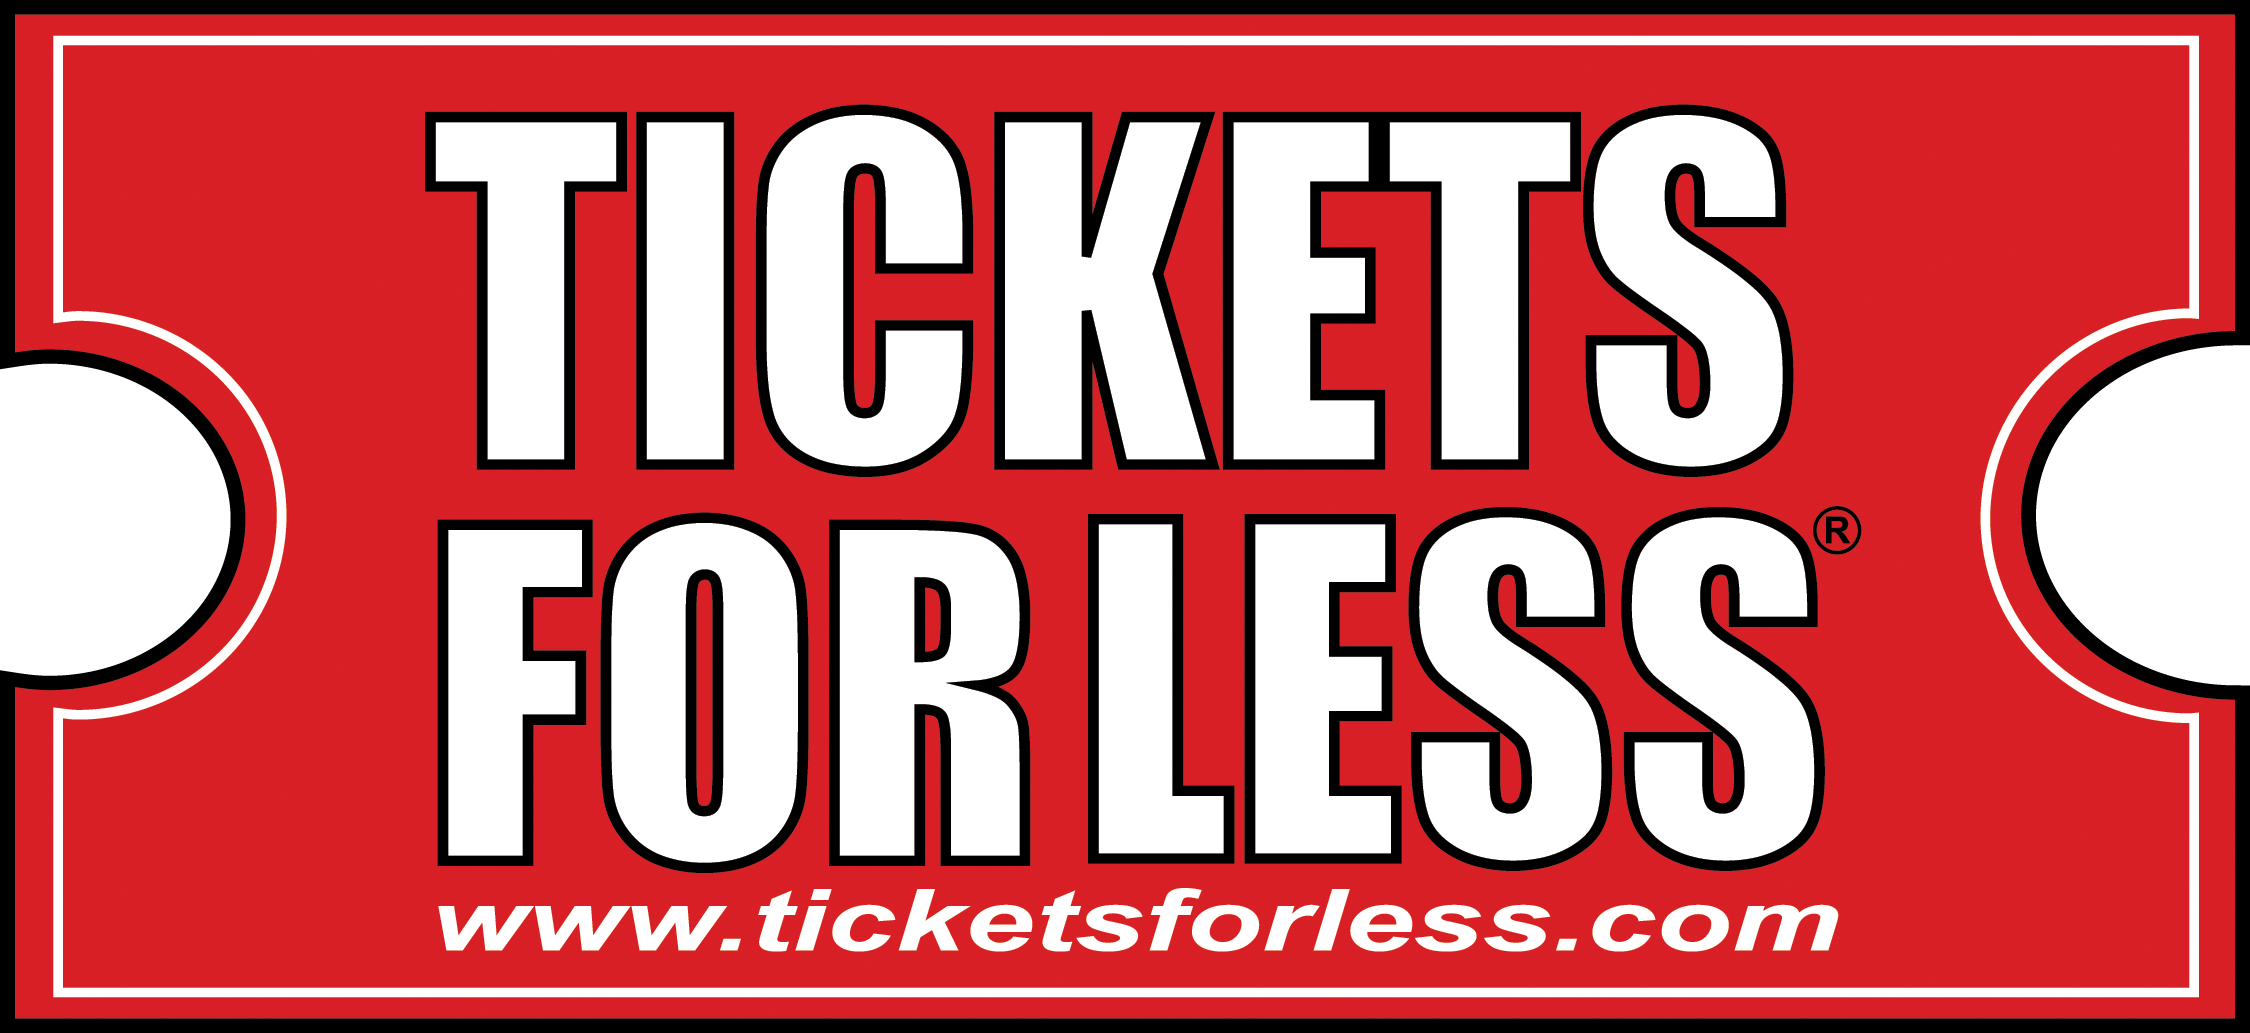 Tickets For Less Logo